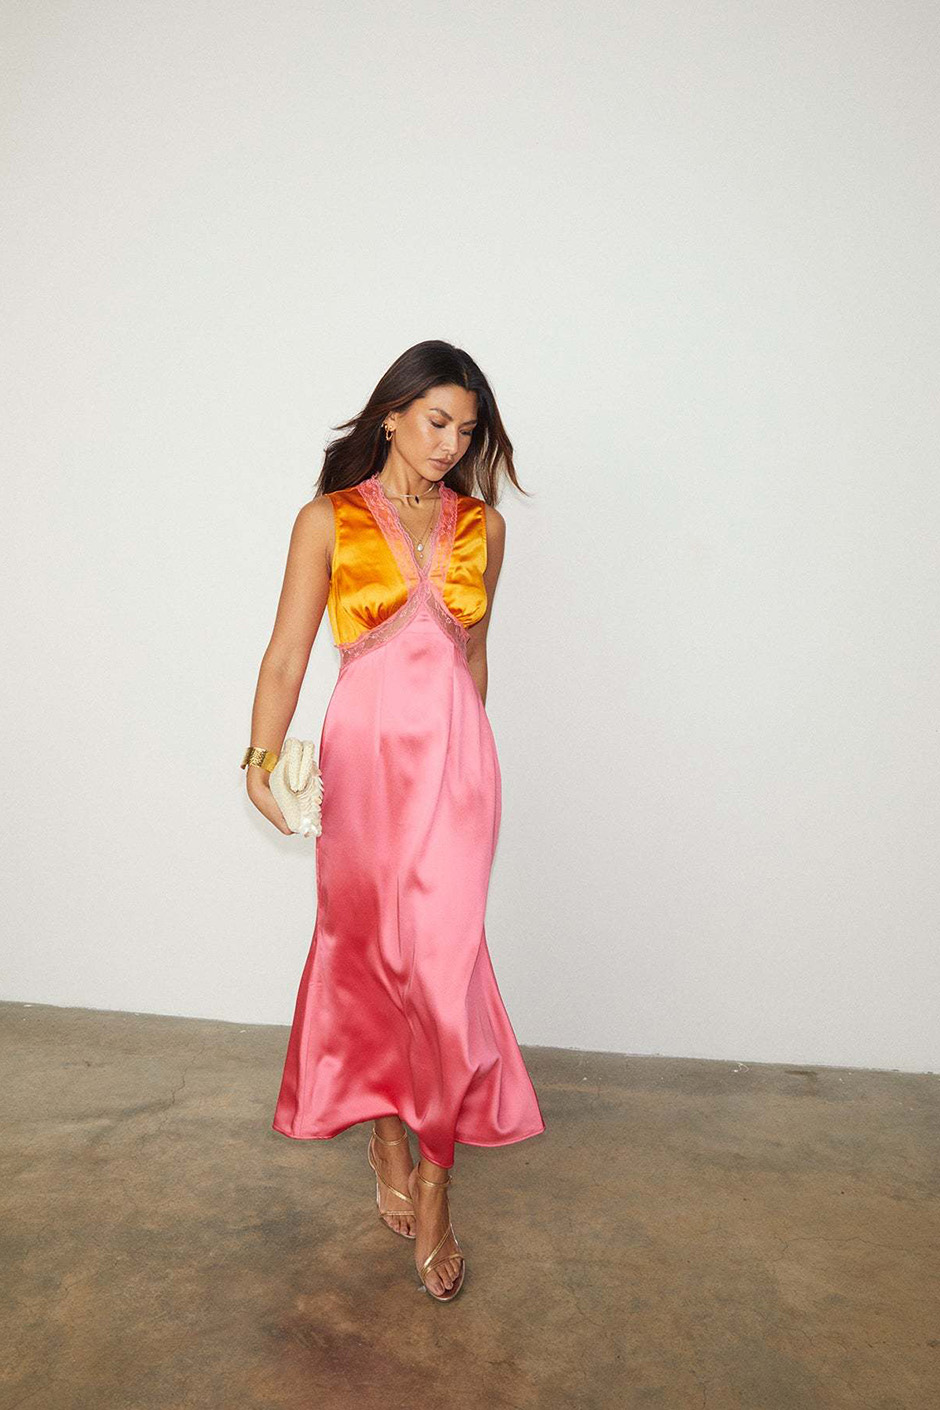 Pink and orange satin midi dress with lace detail from Never Fully Dressed for summer wedding guest dress idea